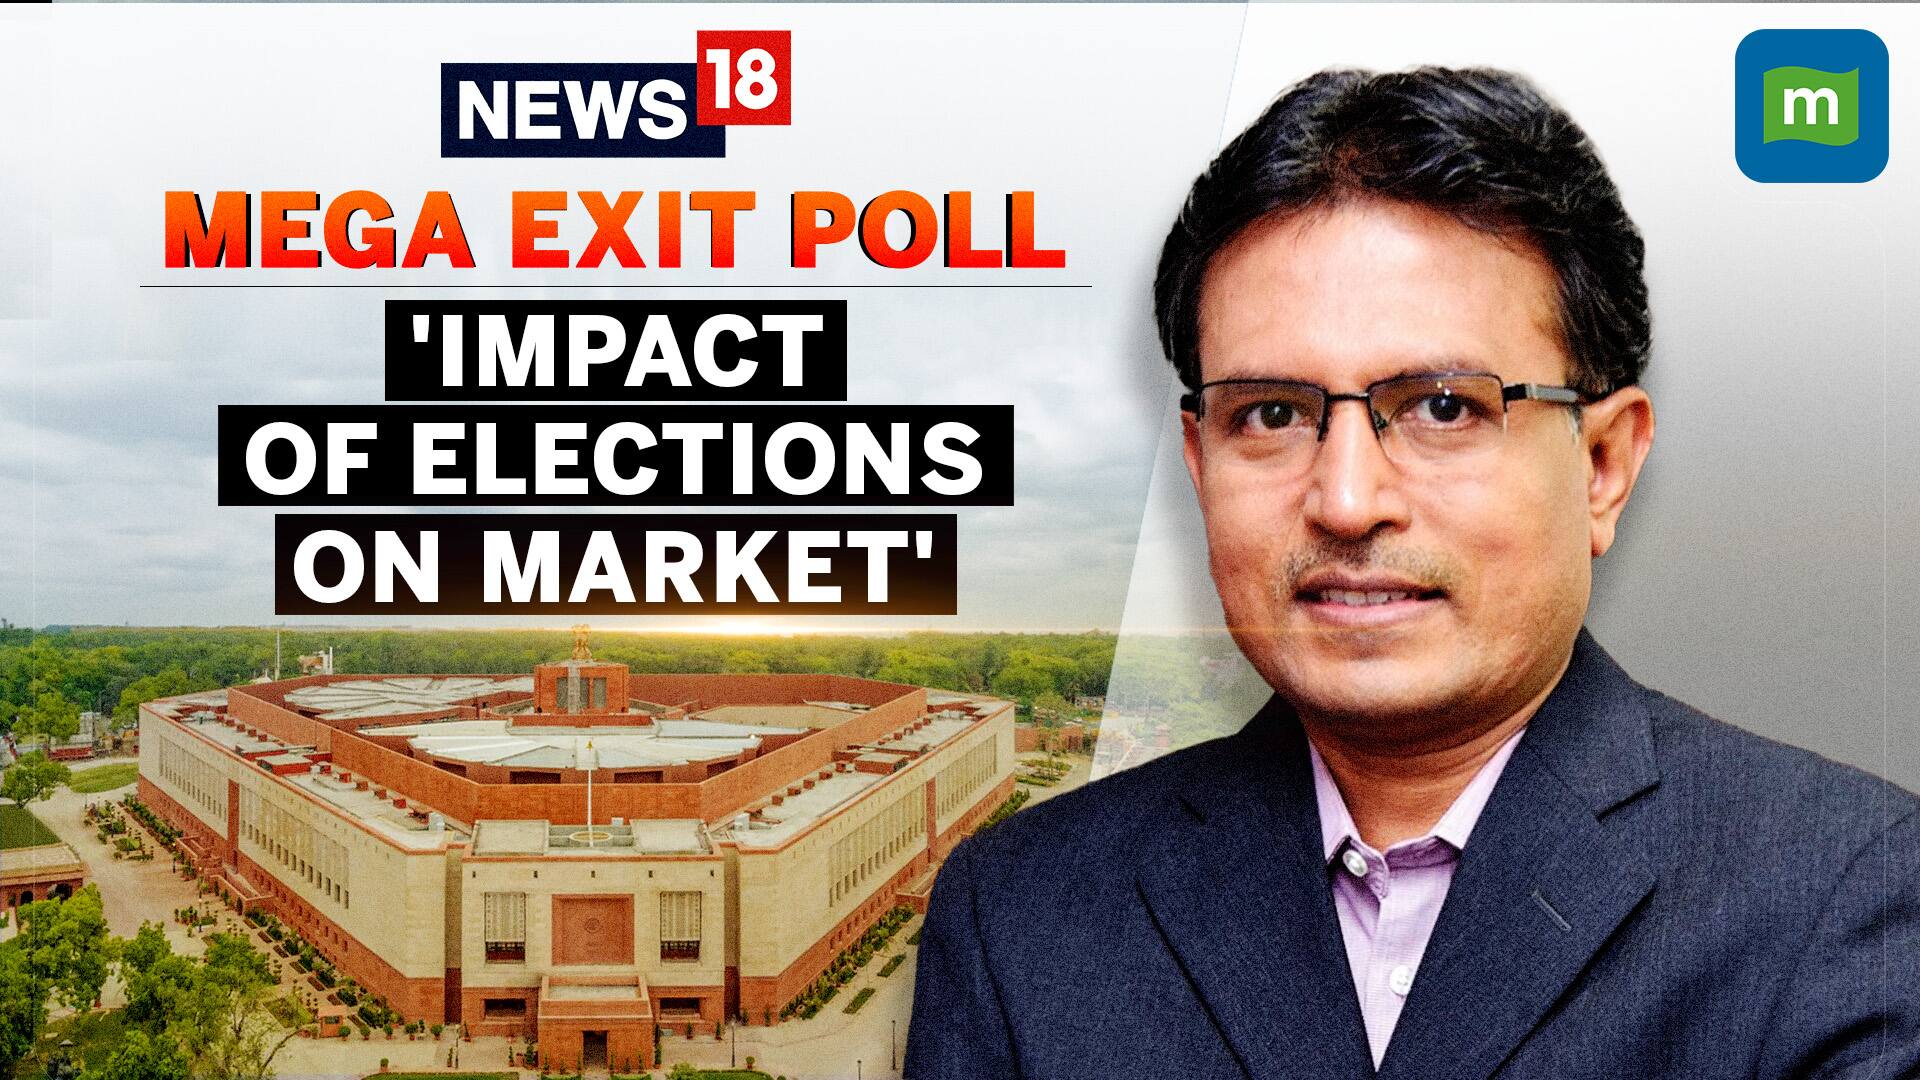 Foreign investors to come back: Nilesh Shah on impact of elections on markets